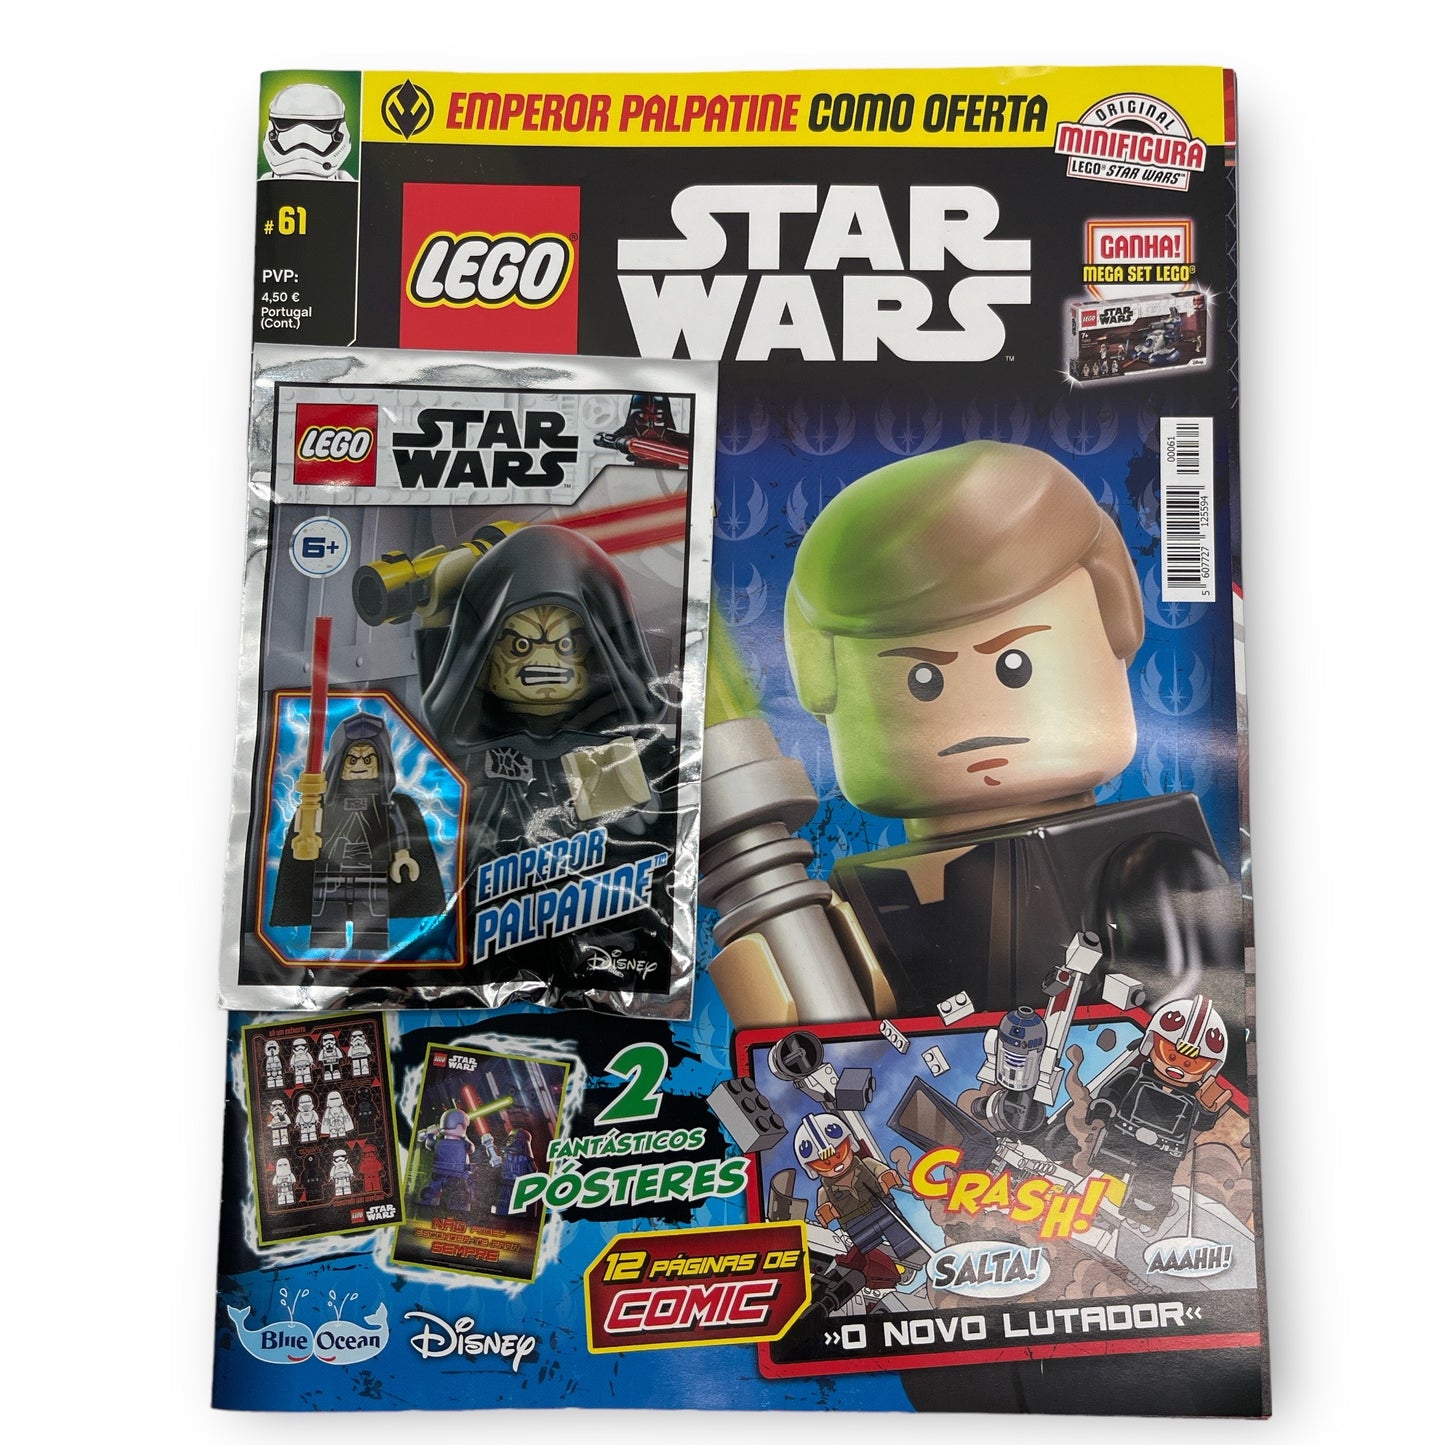 LEGO Star Wars Magazine #61 Portuguese A Must-Have for Star Wars and LEGO Fans